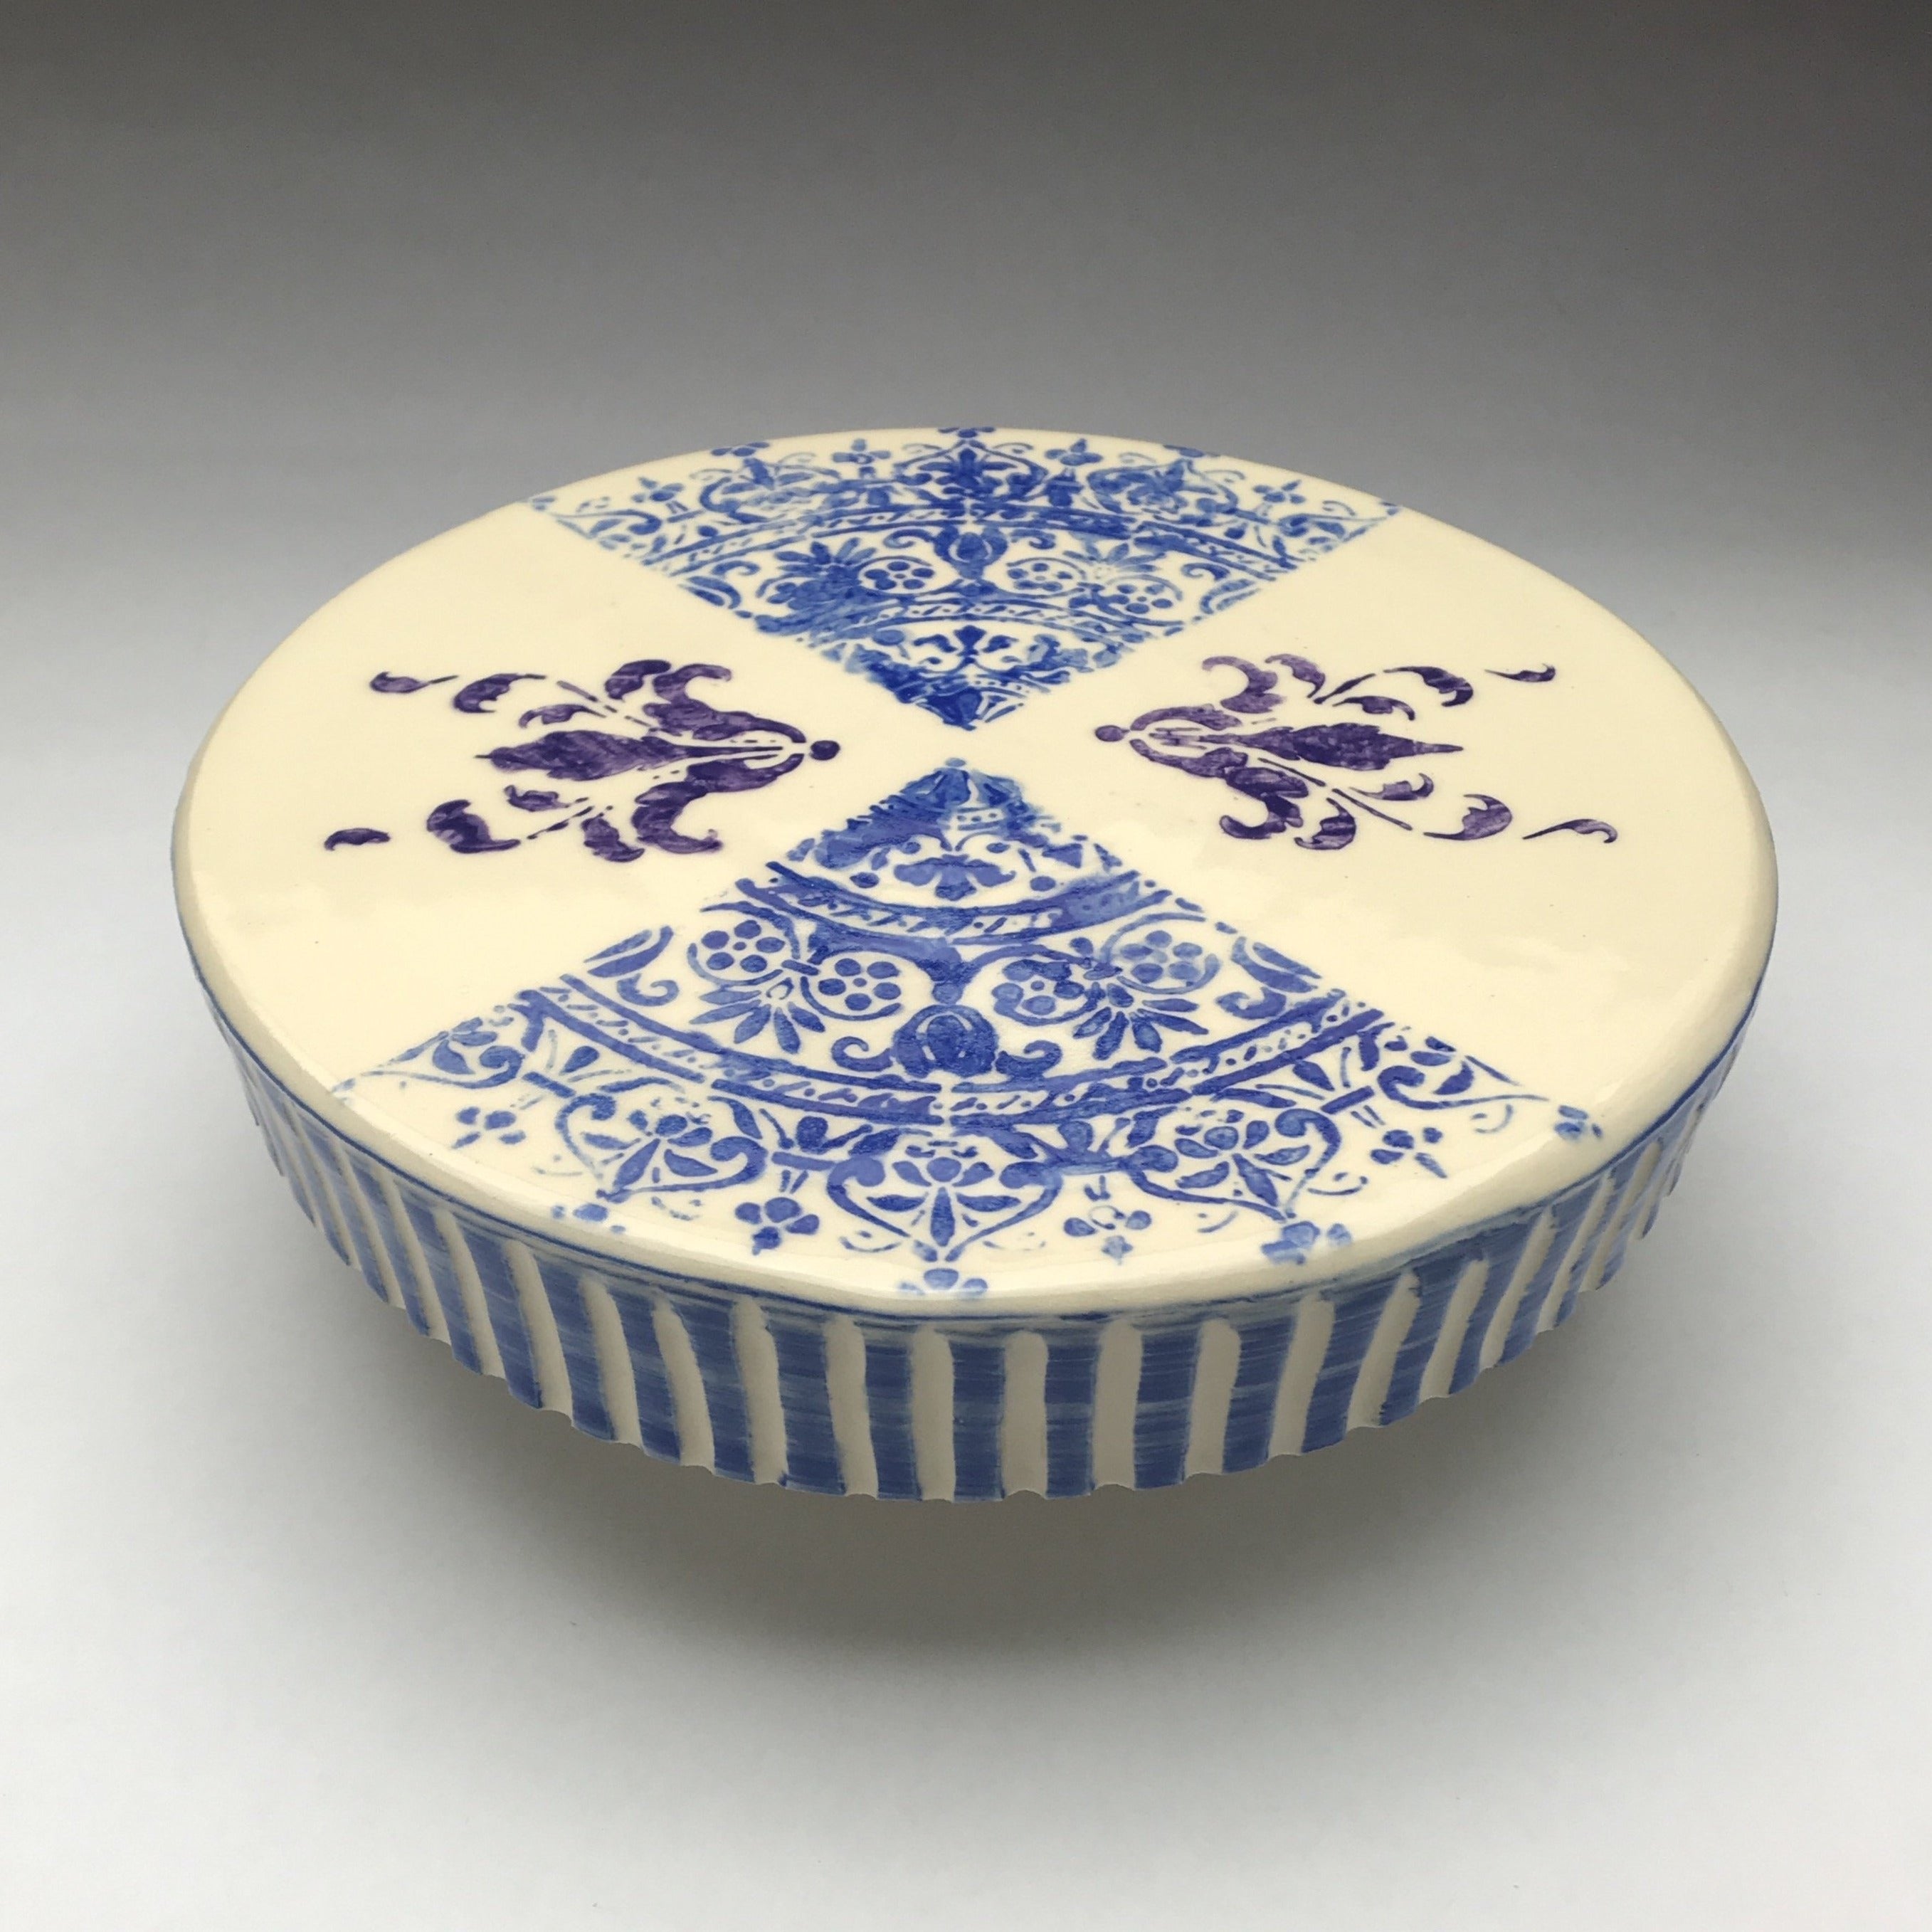 pottery cake stand with blue lace pattern,  purple flourishes and blue striped border